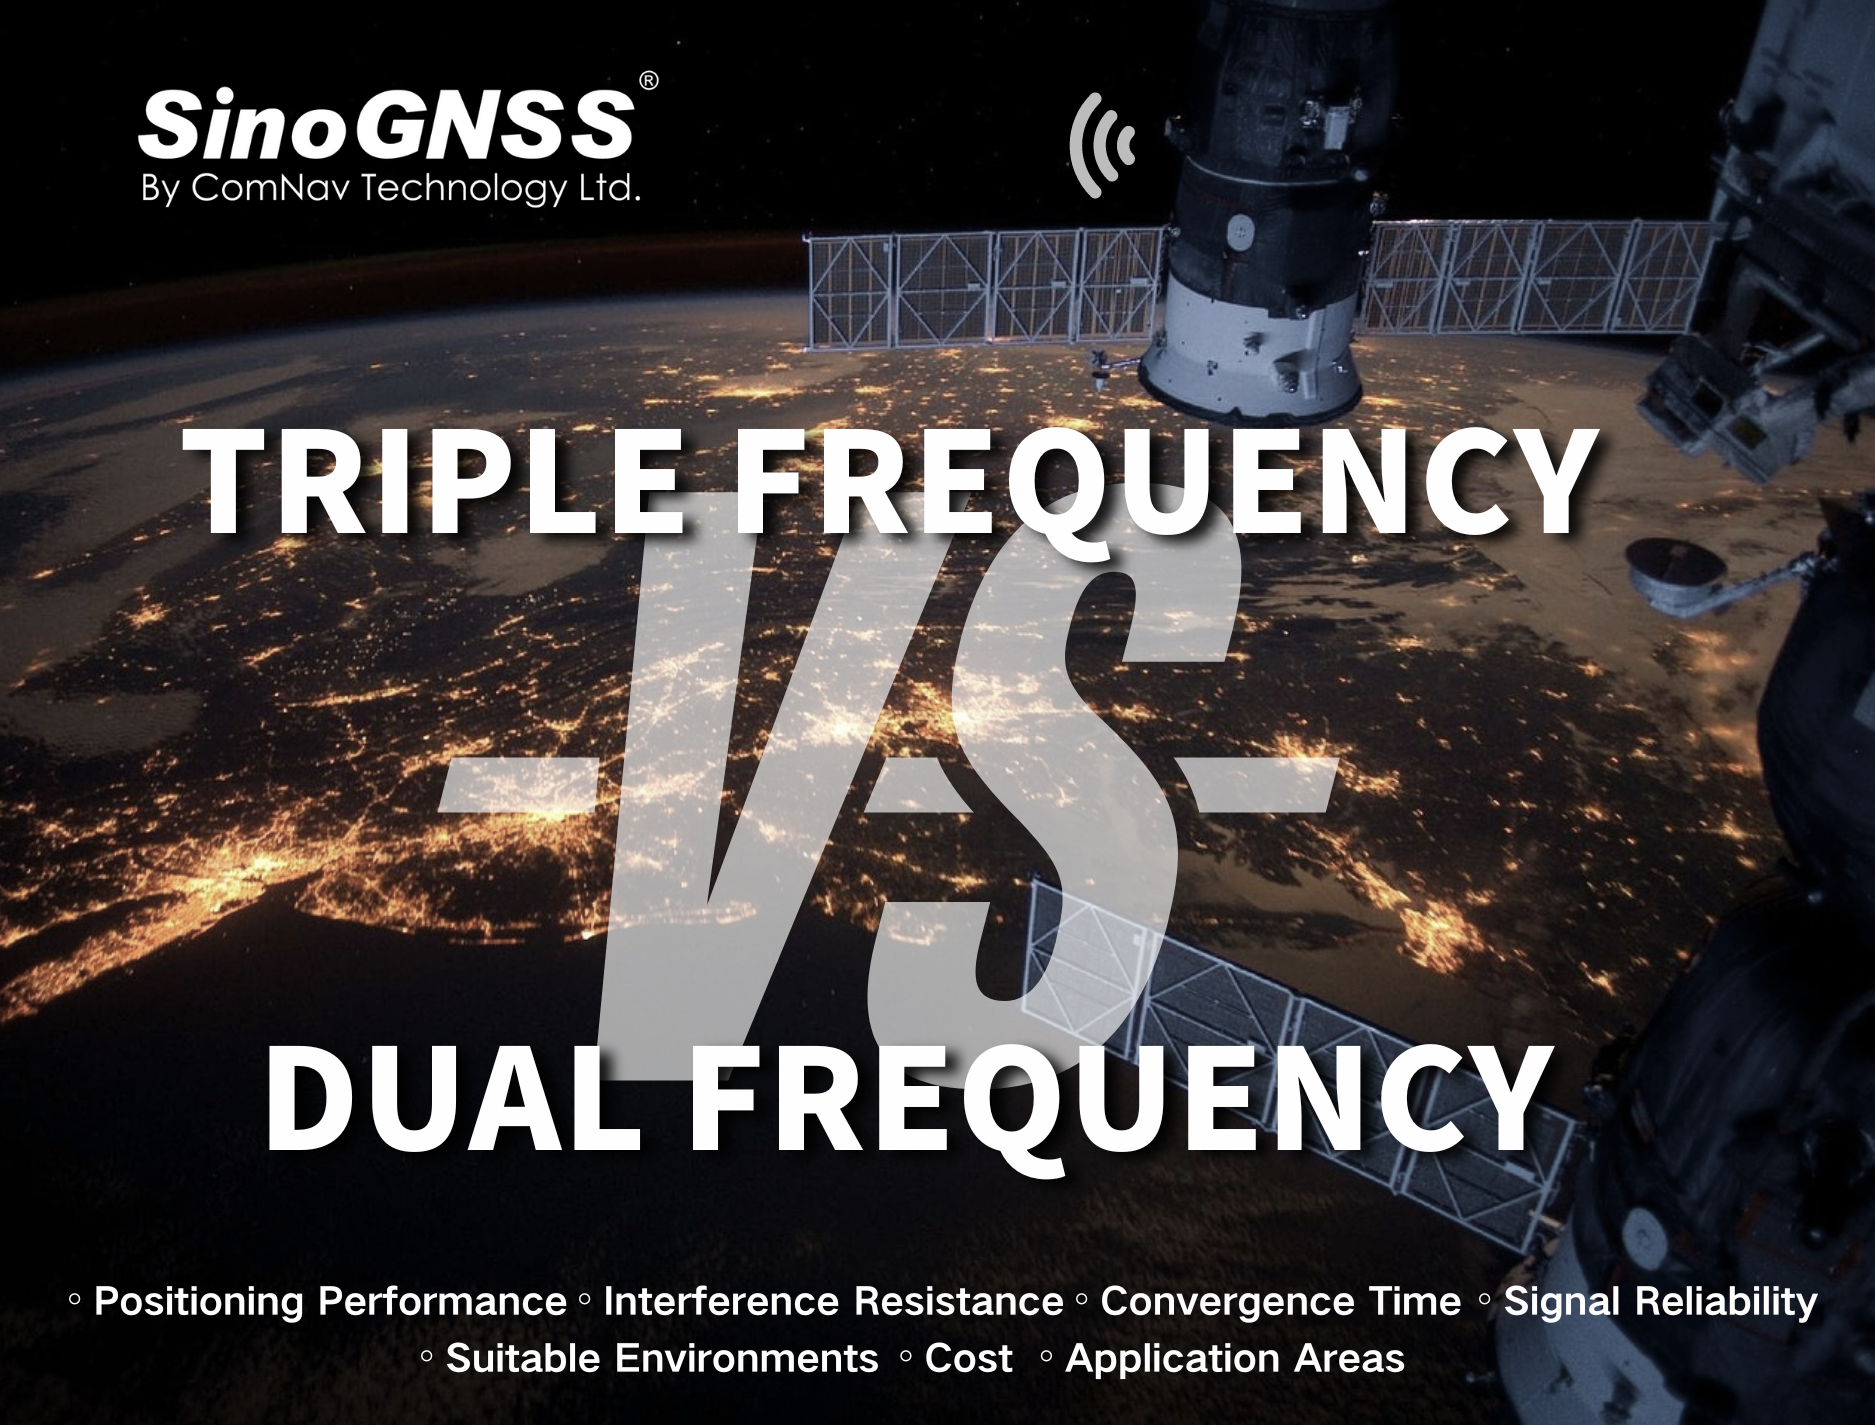 Triple frequency or dual frequency?